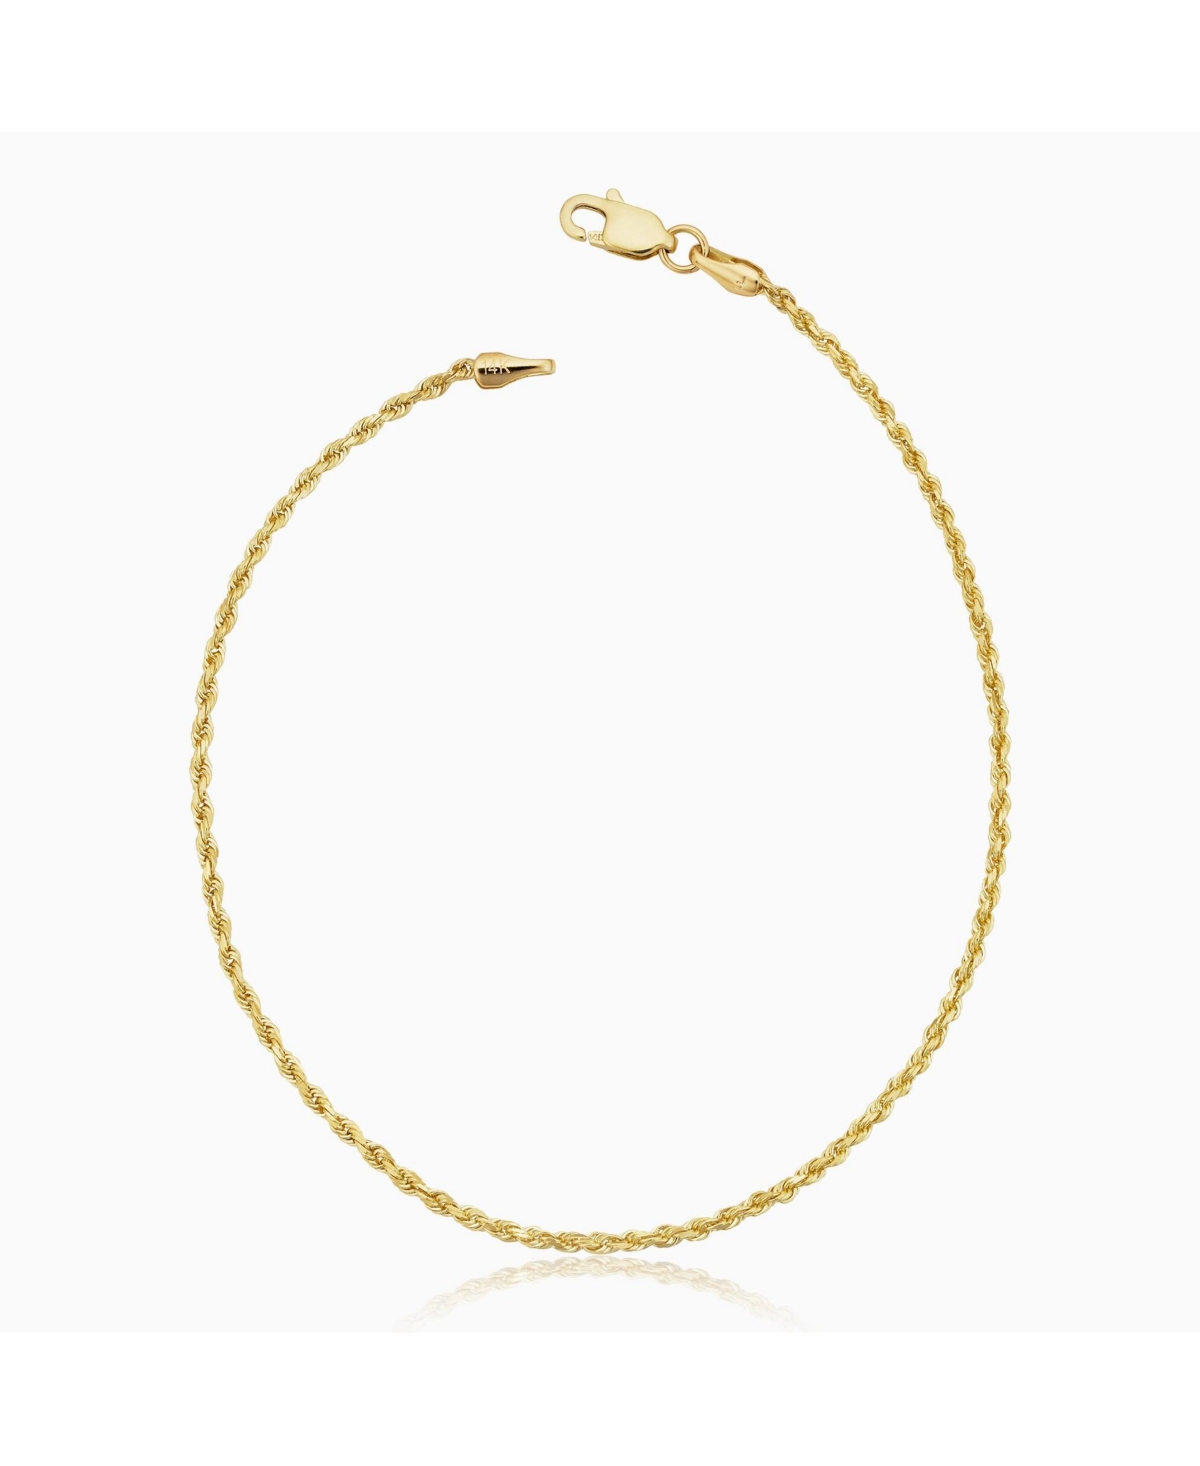 ORADINA ROMAN ROPE ANKLET IN 14K YELLOW GOLD